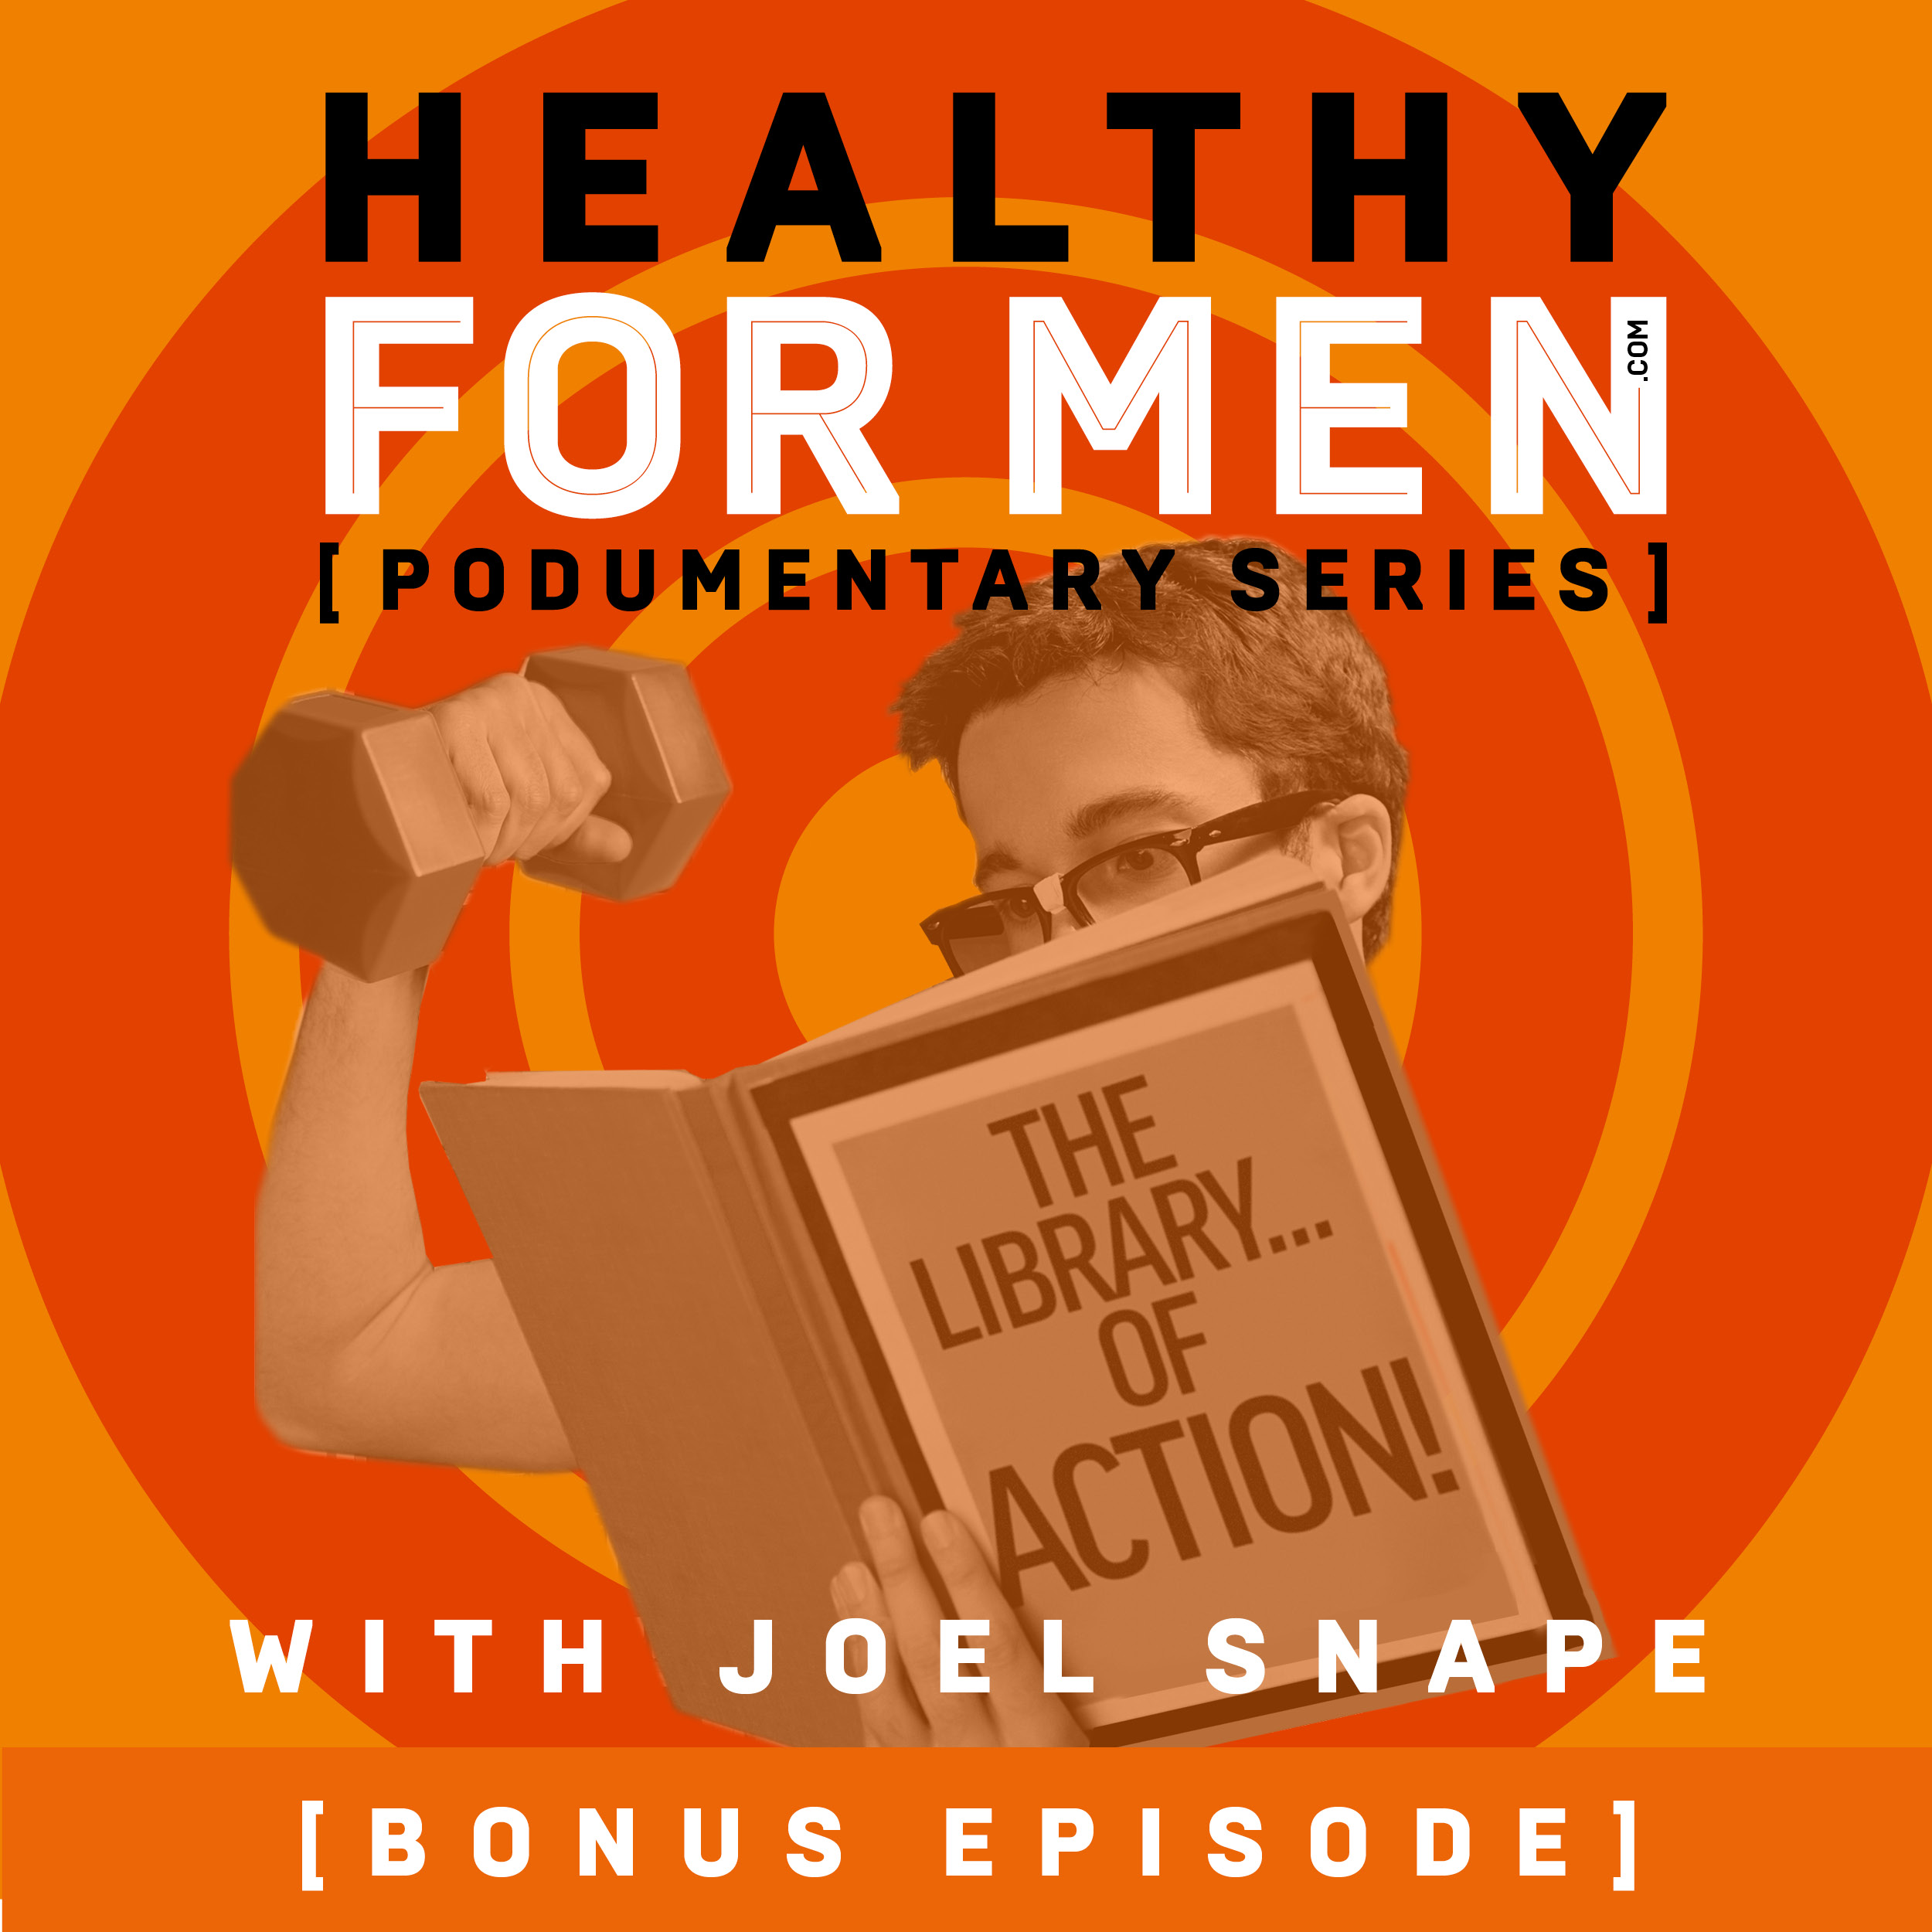 Healthy For Men’s Top 5 Health & Fitness Books